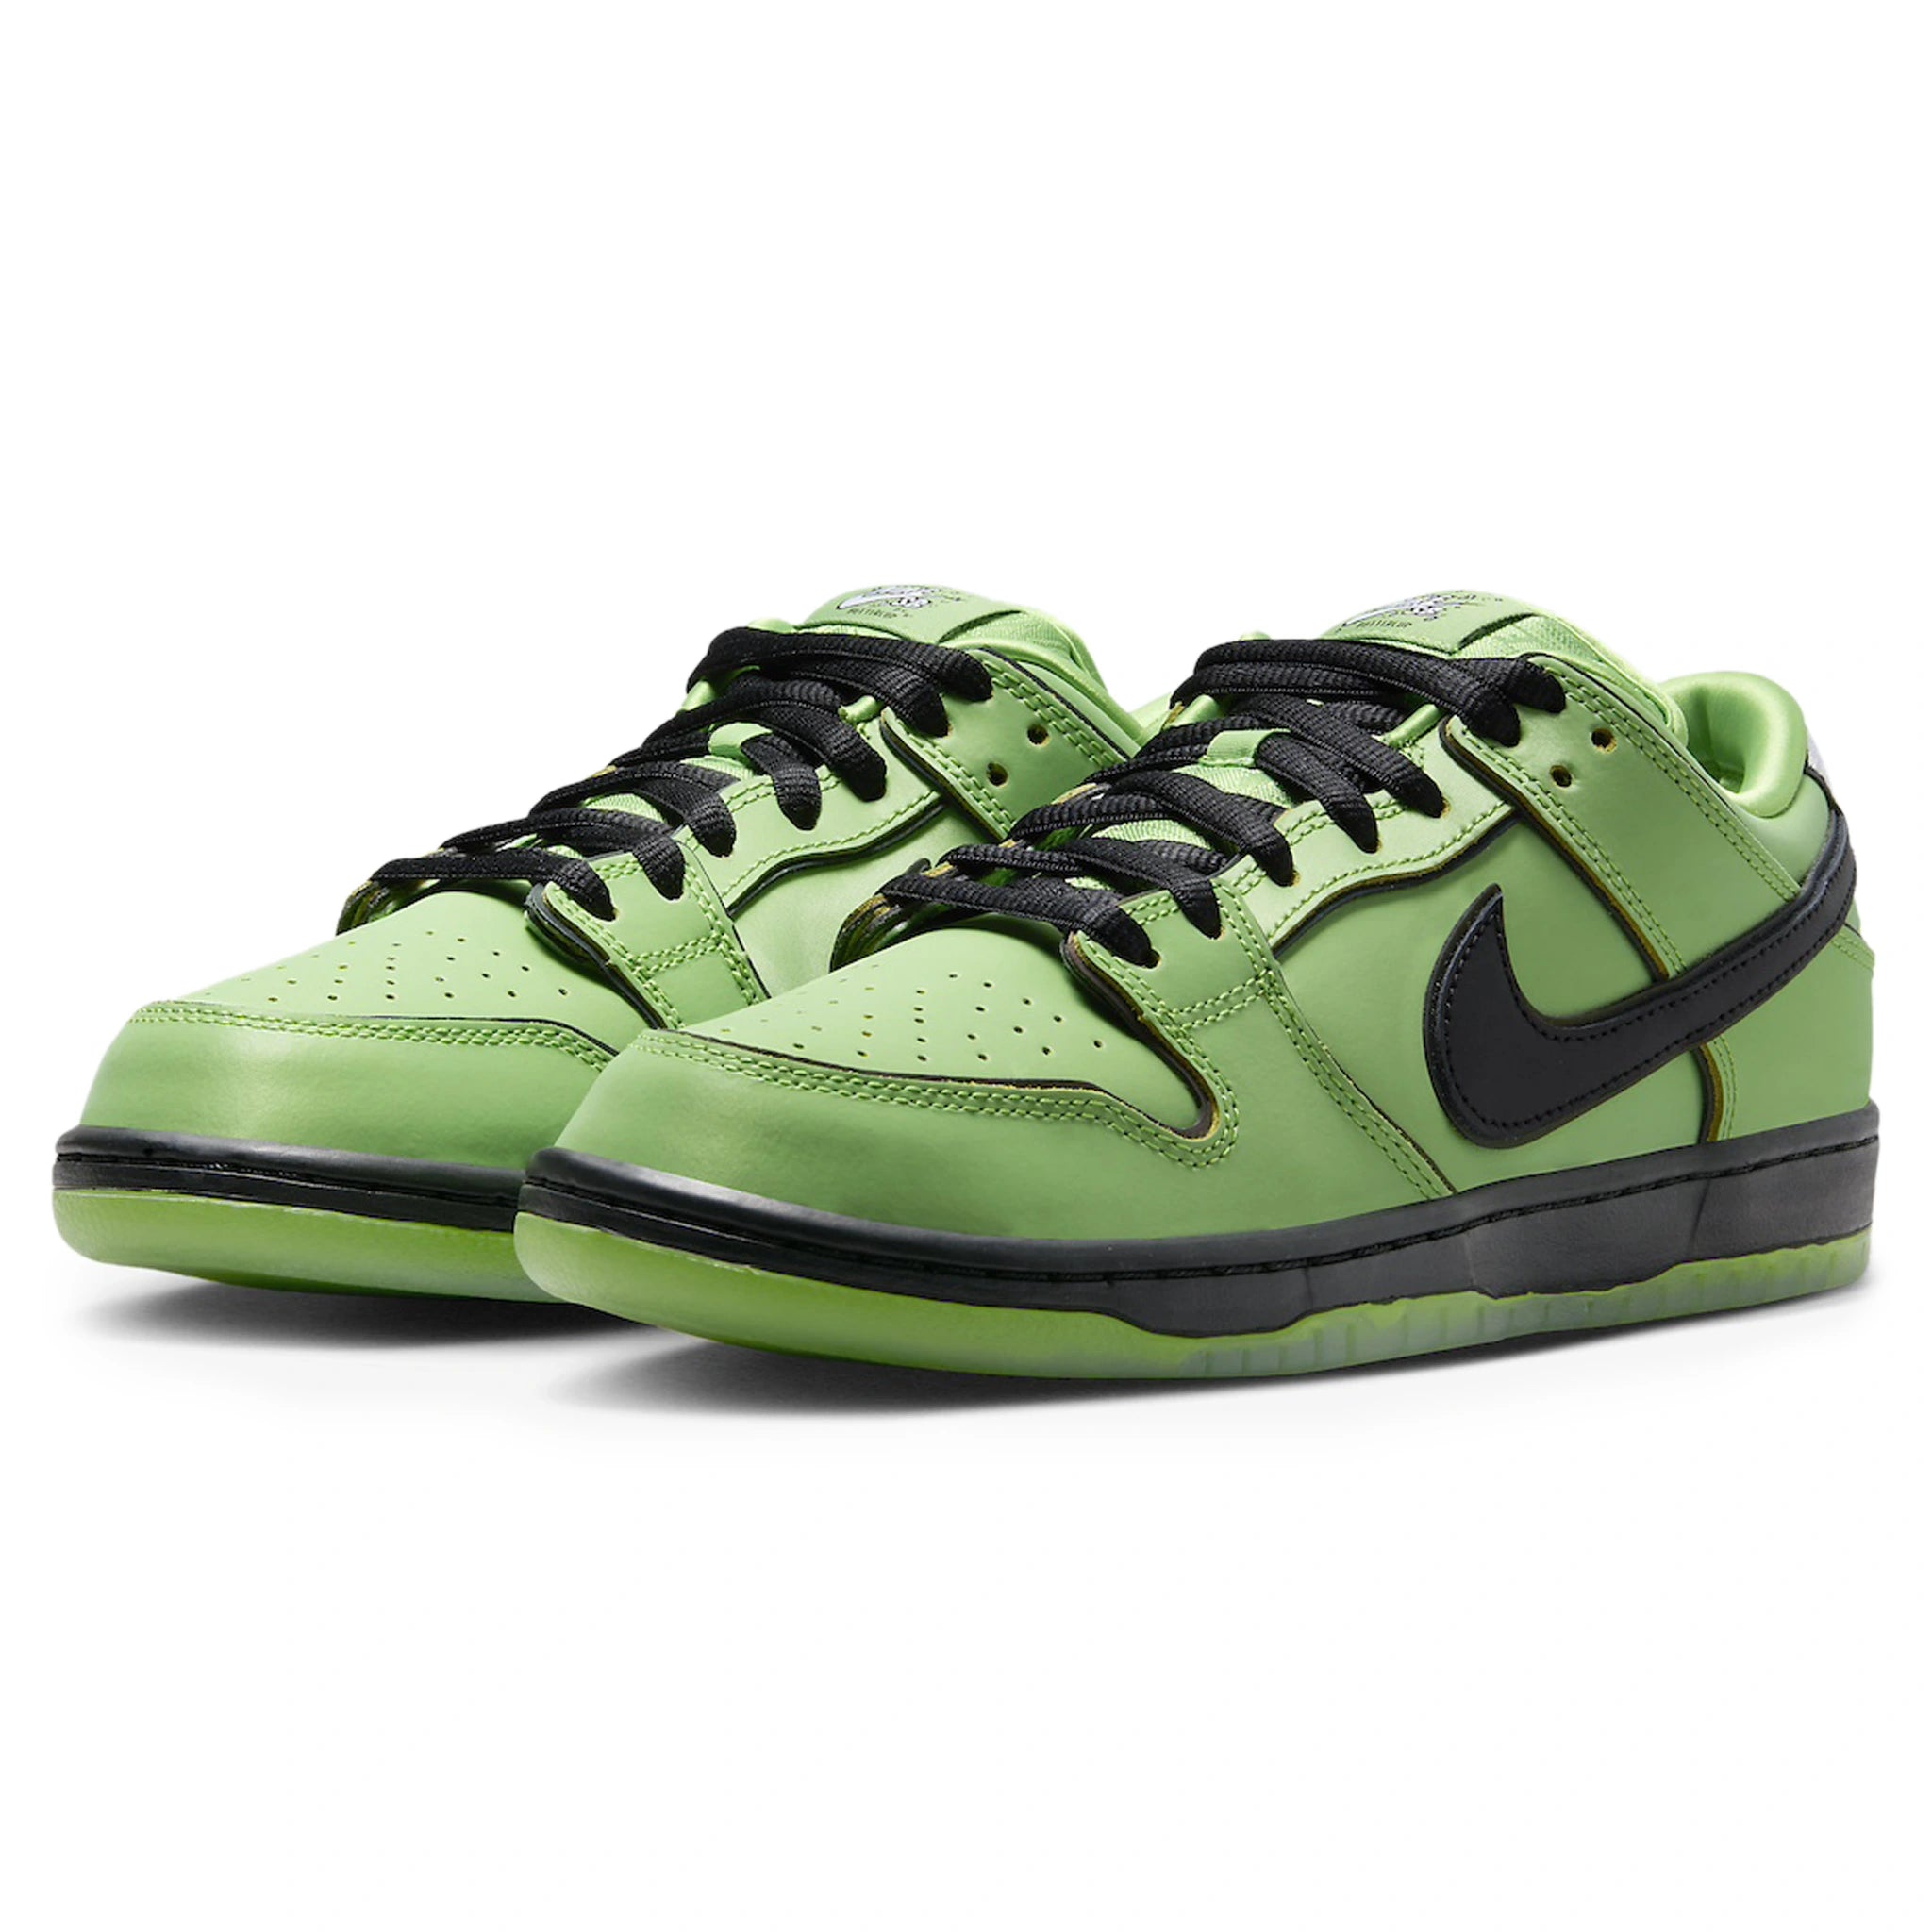 Front side view of The Powerpuff Girls x Nike SB Dunk Low Buttercup FZ8319-300